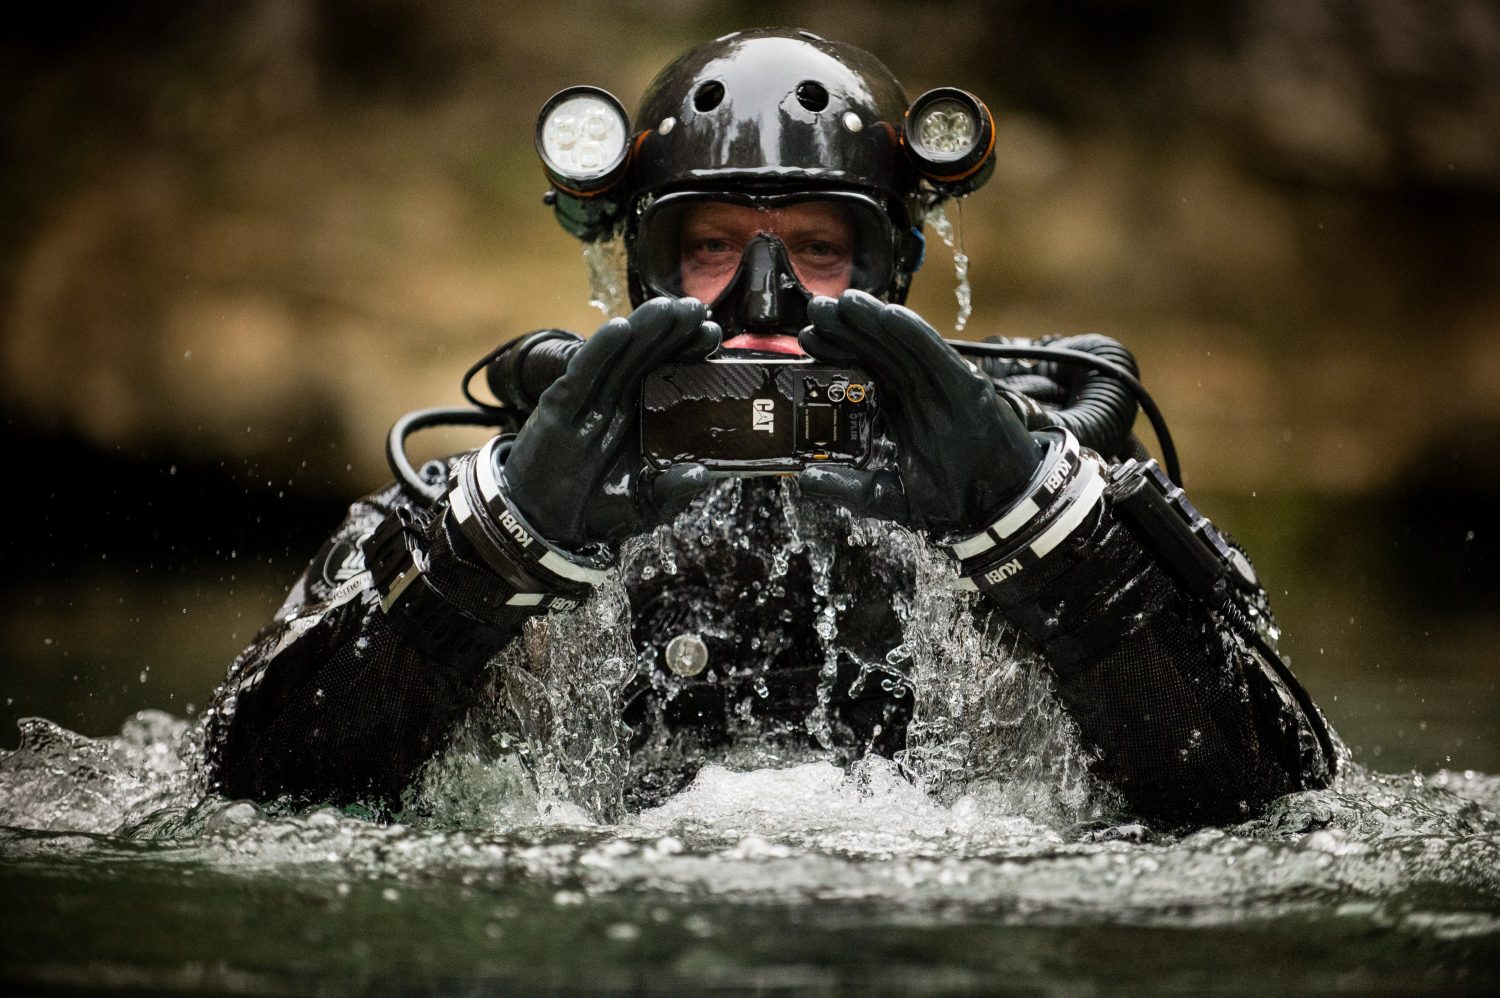 Cave diver Andy Torbett using a Cat S60 to explore the depths